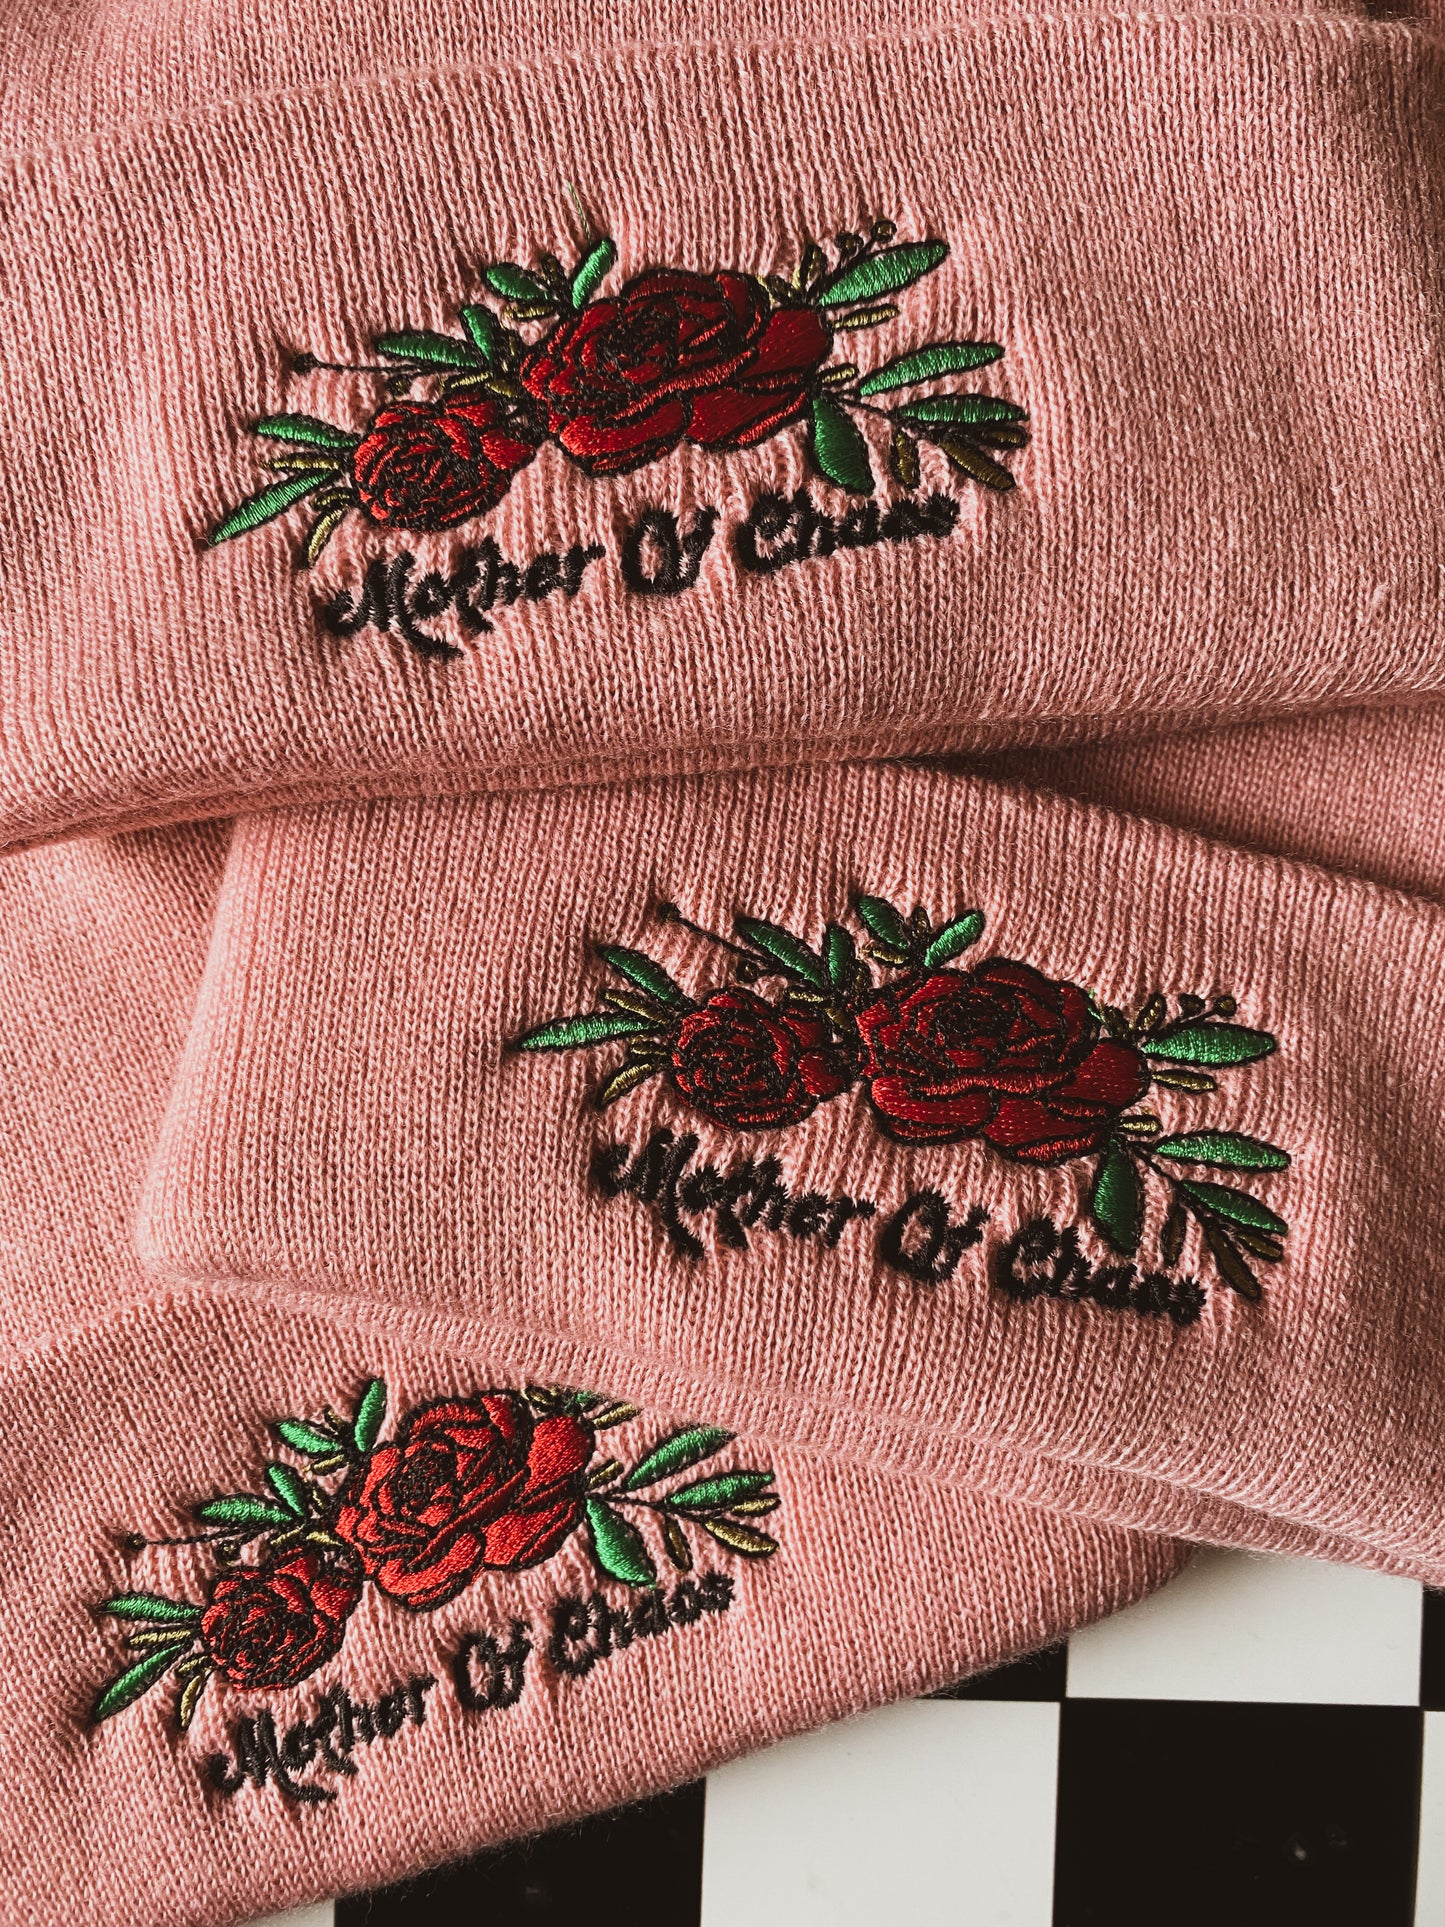 Mother Of Chaos Embroidered Beanie - Dusty Pink